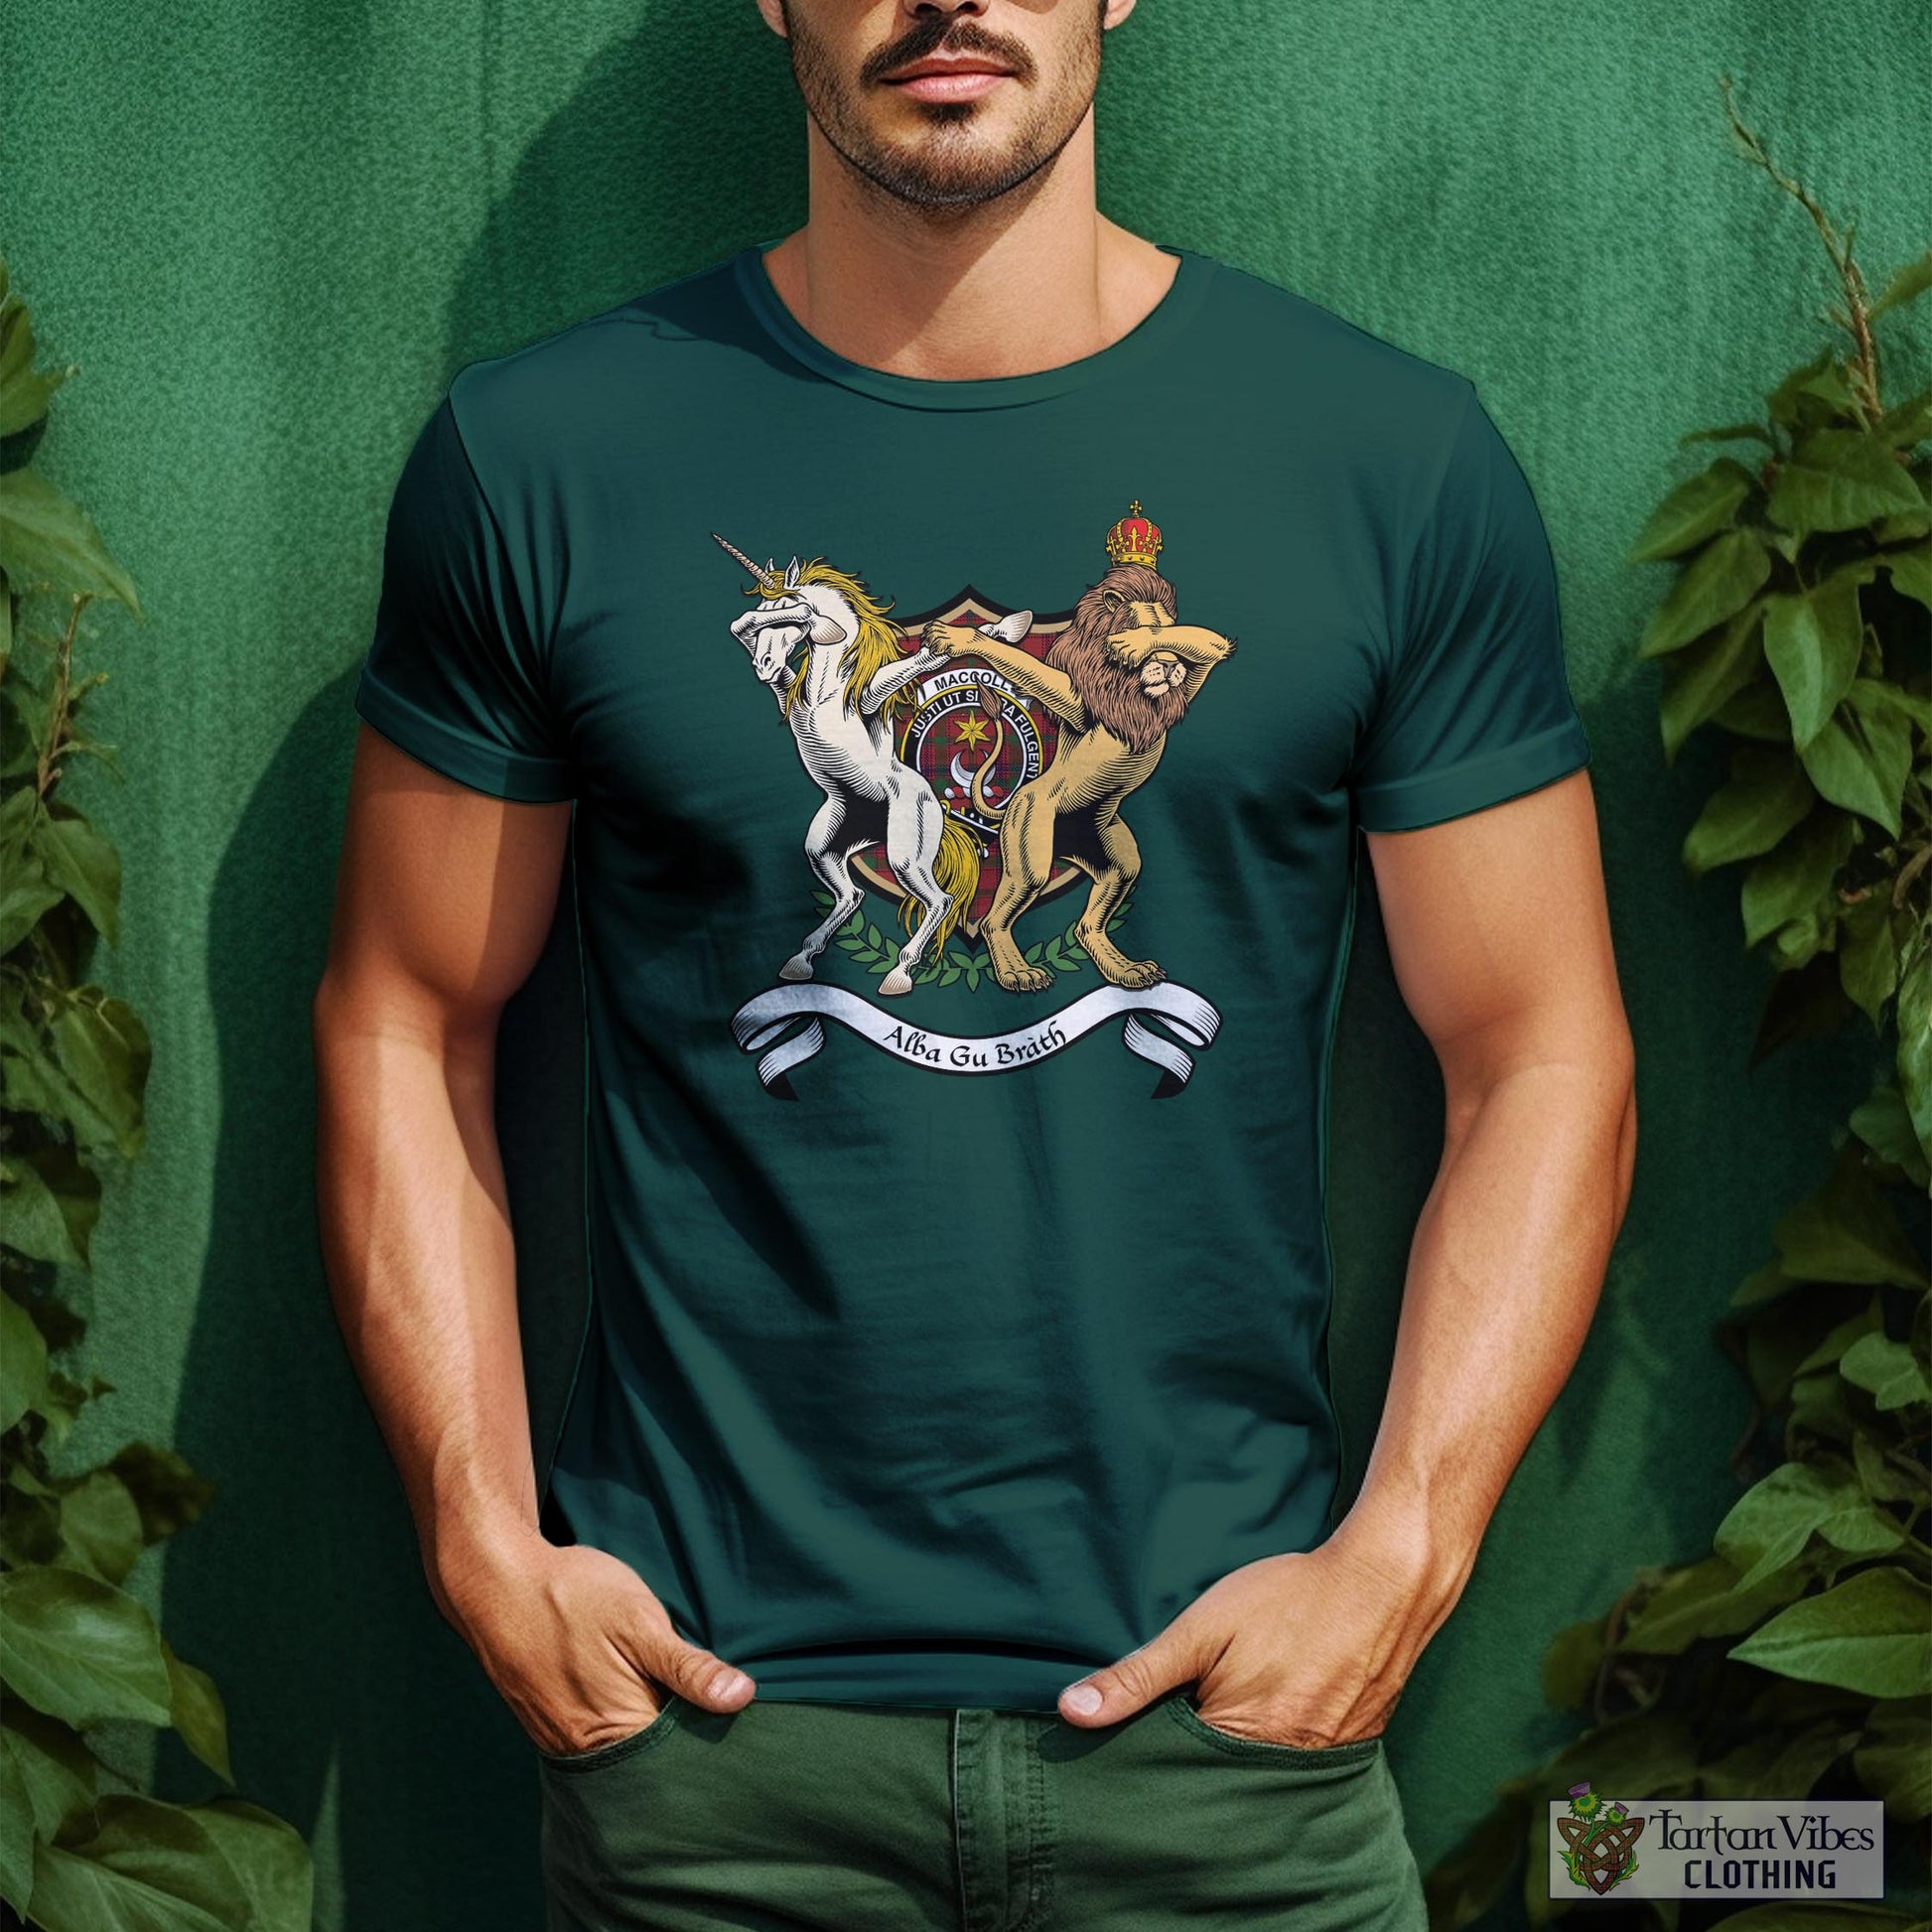 Tartan Vibes Clothing MacColl Family Crest Cotton Men's T-Shirt with Scotland Royal Coat Of Arm Funny Style